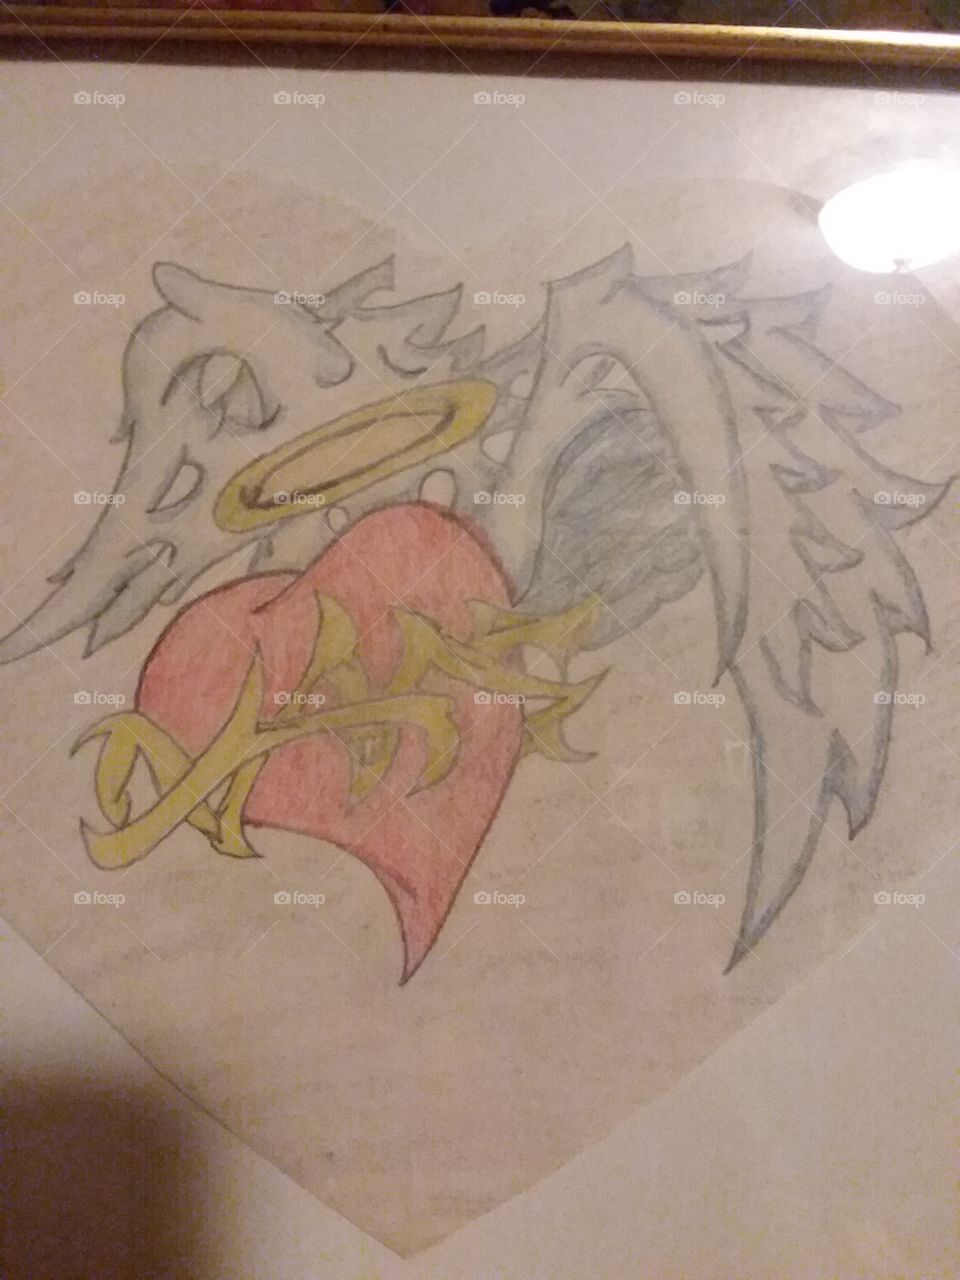 This is my hand drawn tatoo that represents ths death of my dad. the heart represents his heart, and the passing with the halo & wings and the barbed wire the pain it caused to my heart when he passed